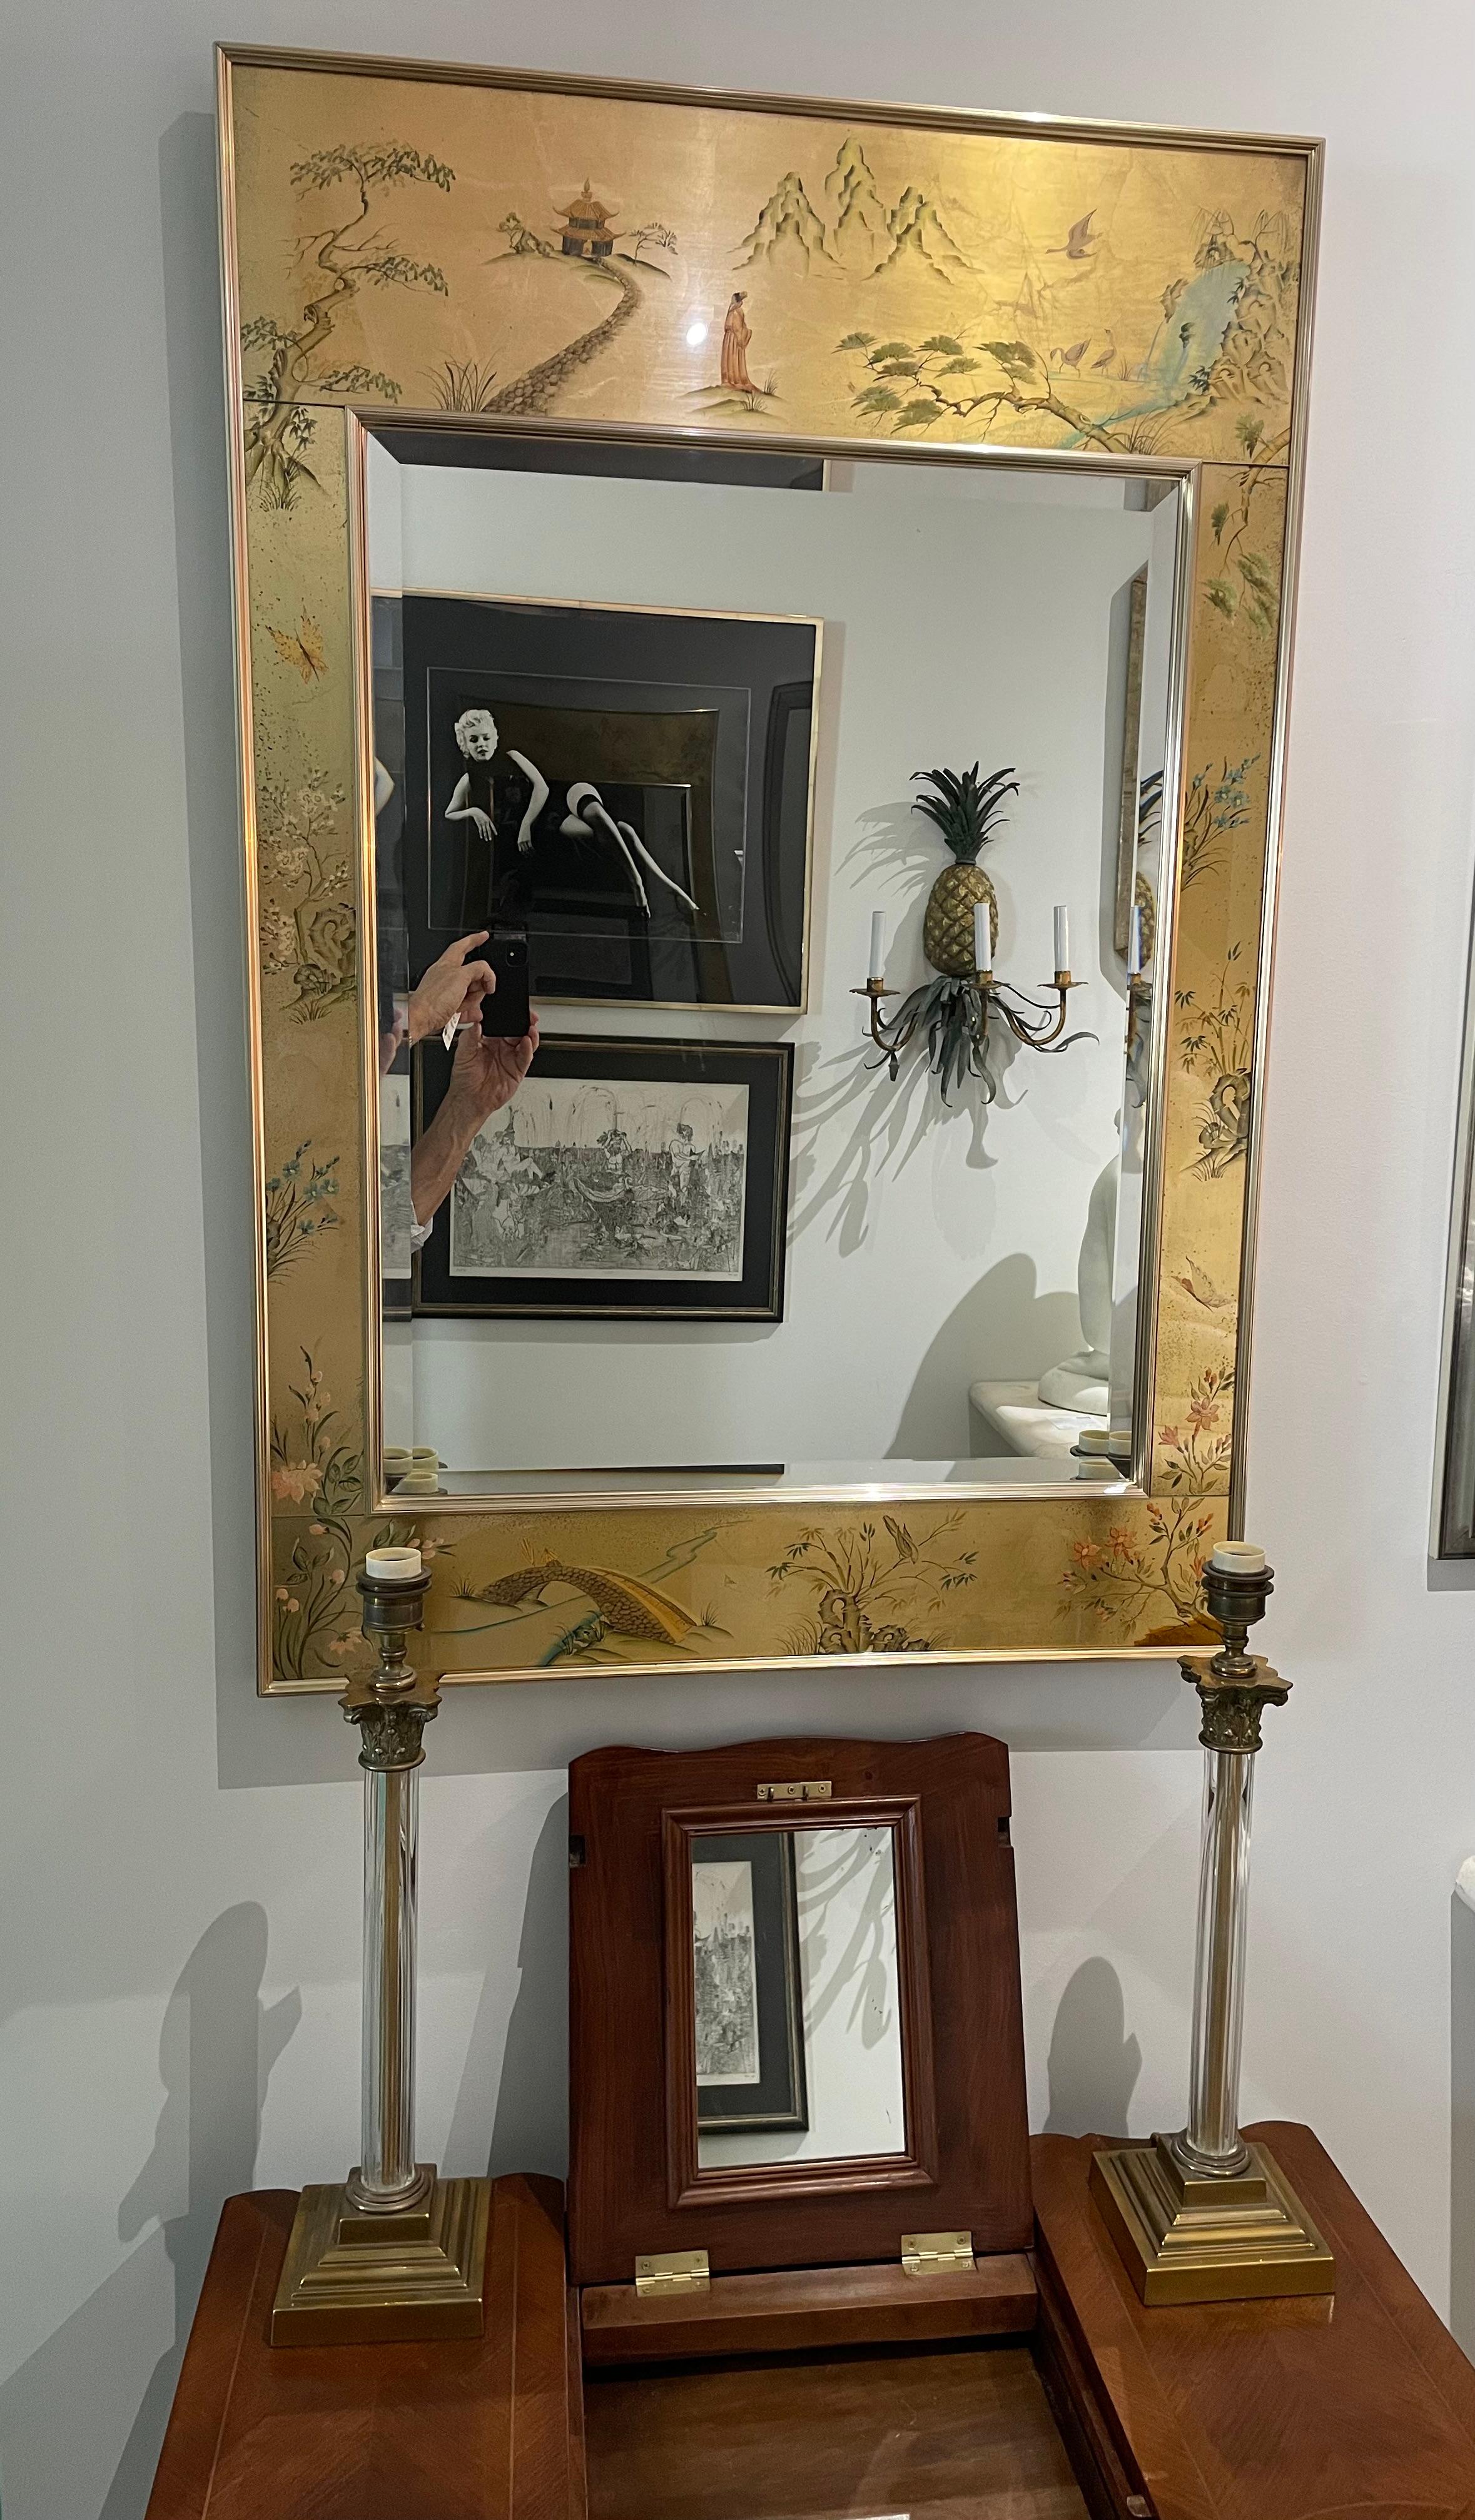 This stylish and chic LaBarge wall mirror dates to the 1970s, and was acquired from a Boca Raton estate.  The piece has an anodized aluminum frame and eglomise, hand painted panels with exotic scene of birds, flowers and bridges. 

Note:  Signed on